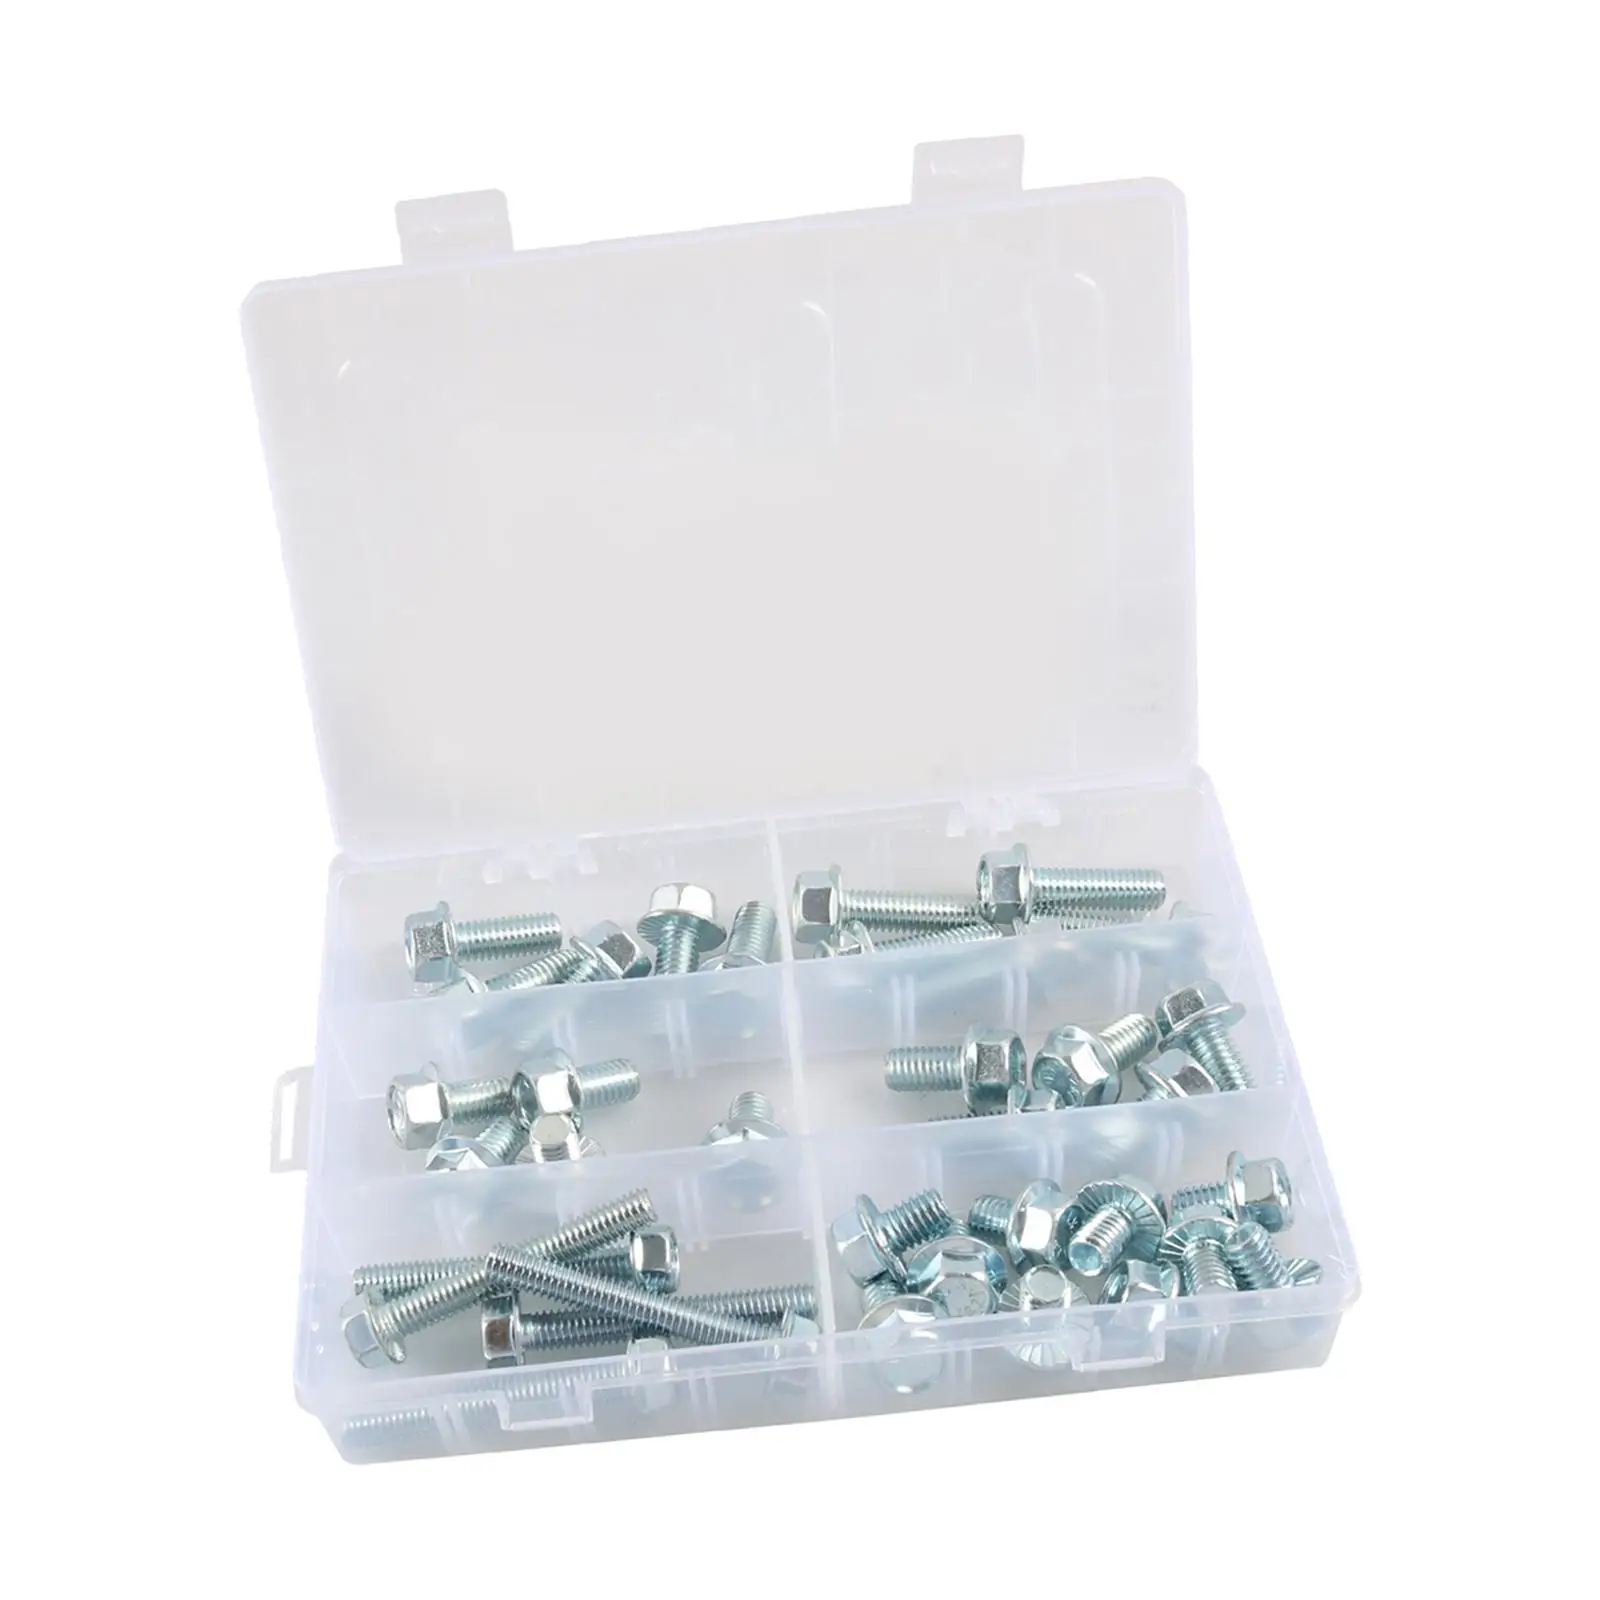 35Pcs nut bolts assortment, Fasteners Kits Stainless Steel 6 Different Sizes Retainer Universal Screw for Door Panel Interior